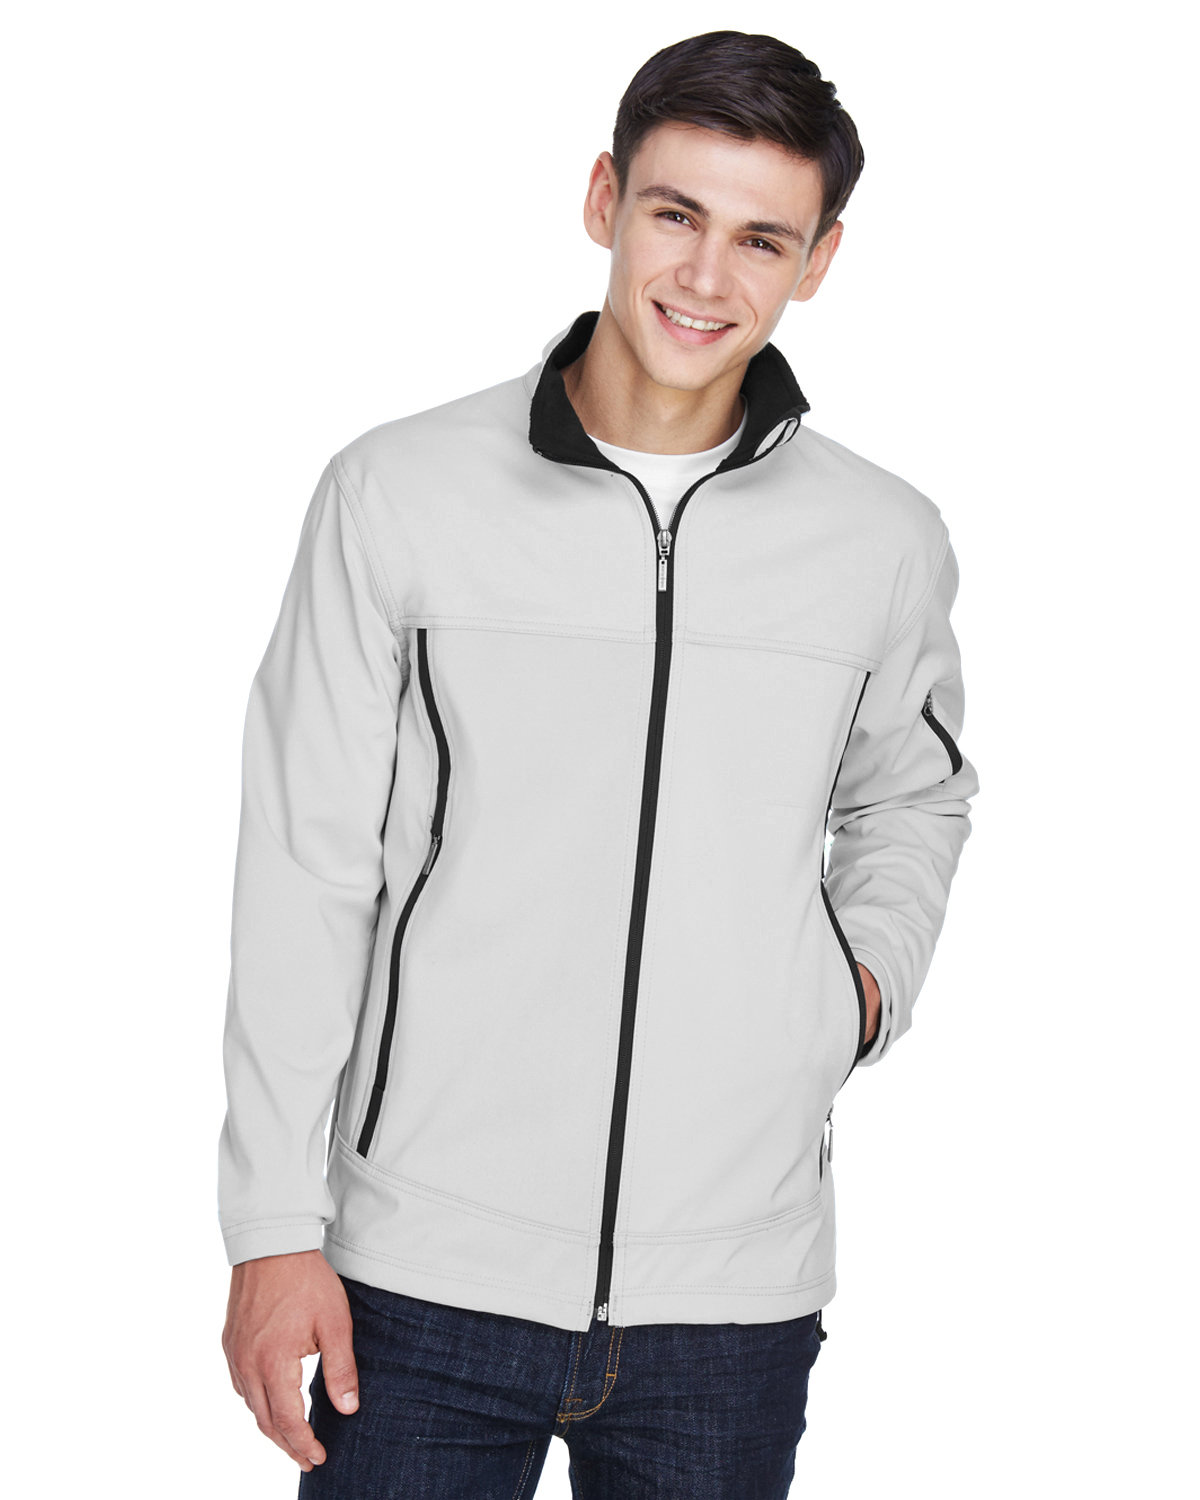 North End Men's Three-Layer Fleece Bonded Performance Soft Shell Jacket NATURAL STONE 